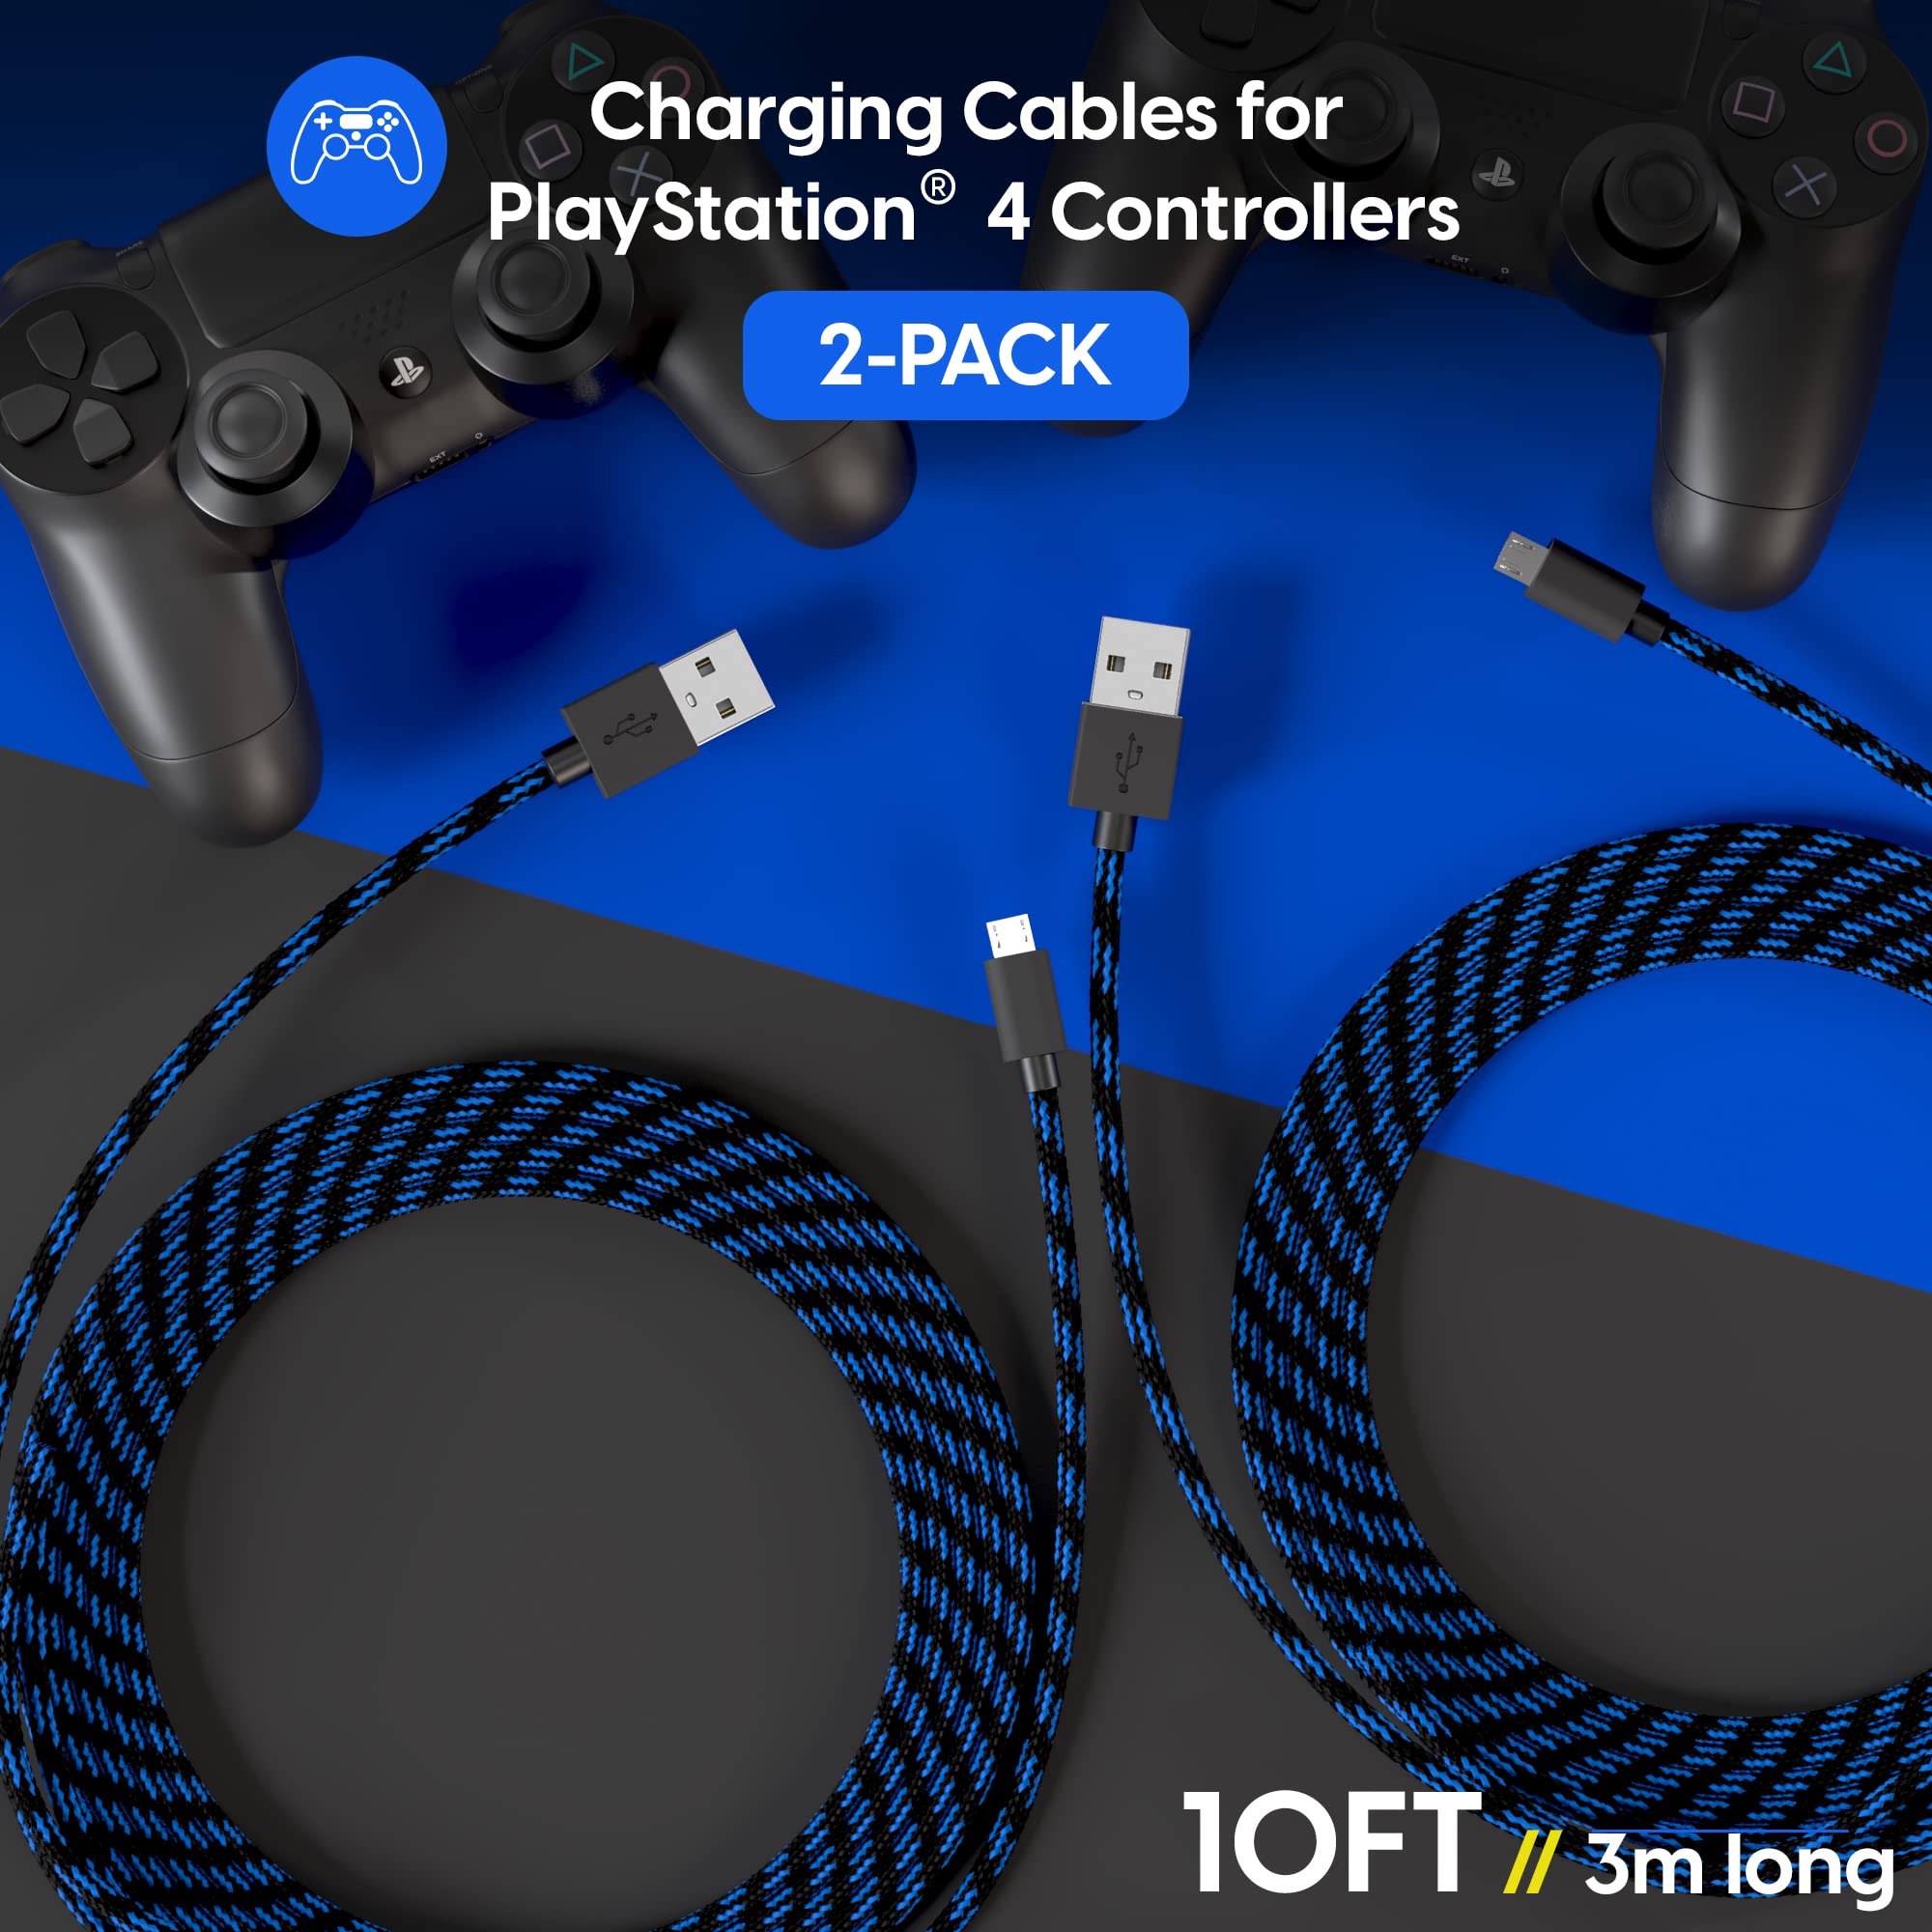 TALK WORKS Long Controller Charging Cable for Playstation 4-10-Foot Long Braided Micro USB Cord Charger Cord for PS4 Controller - Blue-Black, 2 Pack